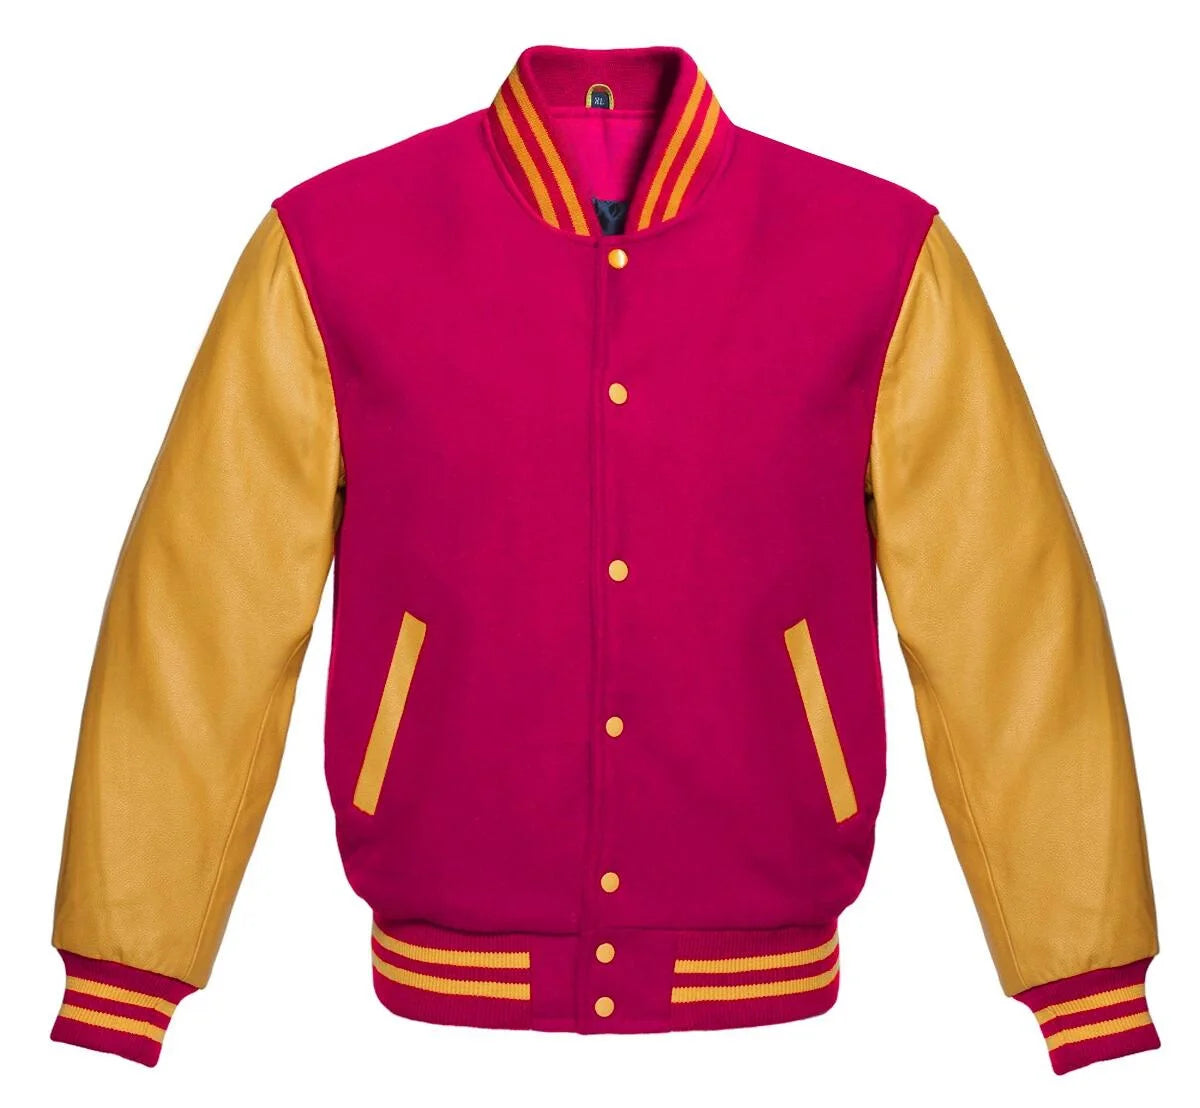 Gold and Hot Pink Letterman Jacket